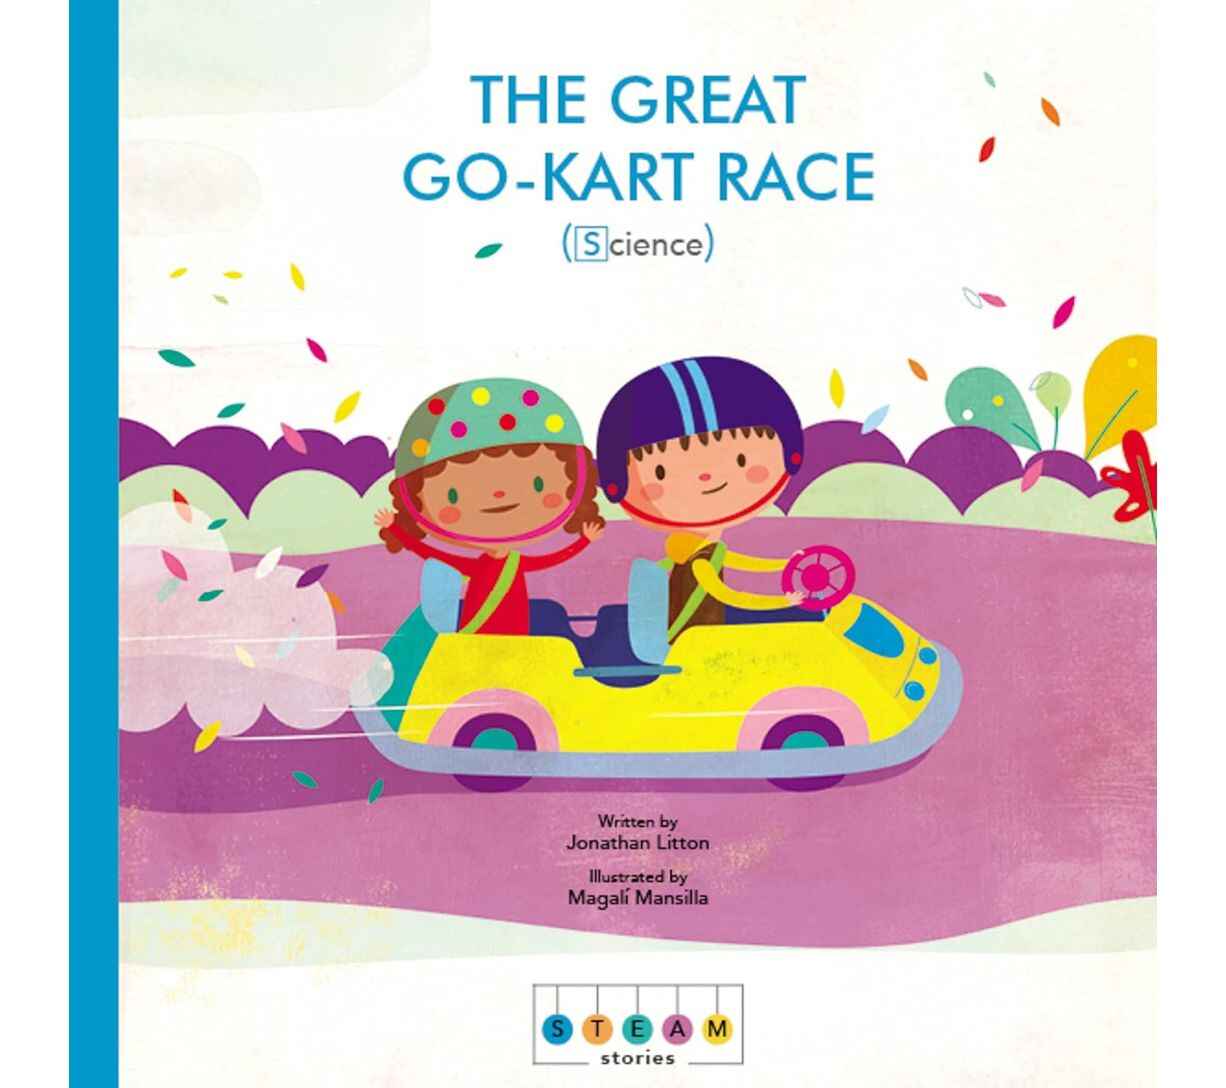 STEAM Stories - The Great Go-Kart Race (Science)